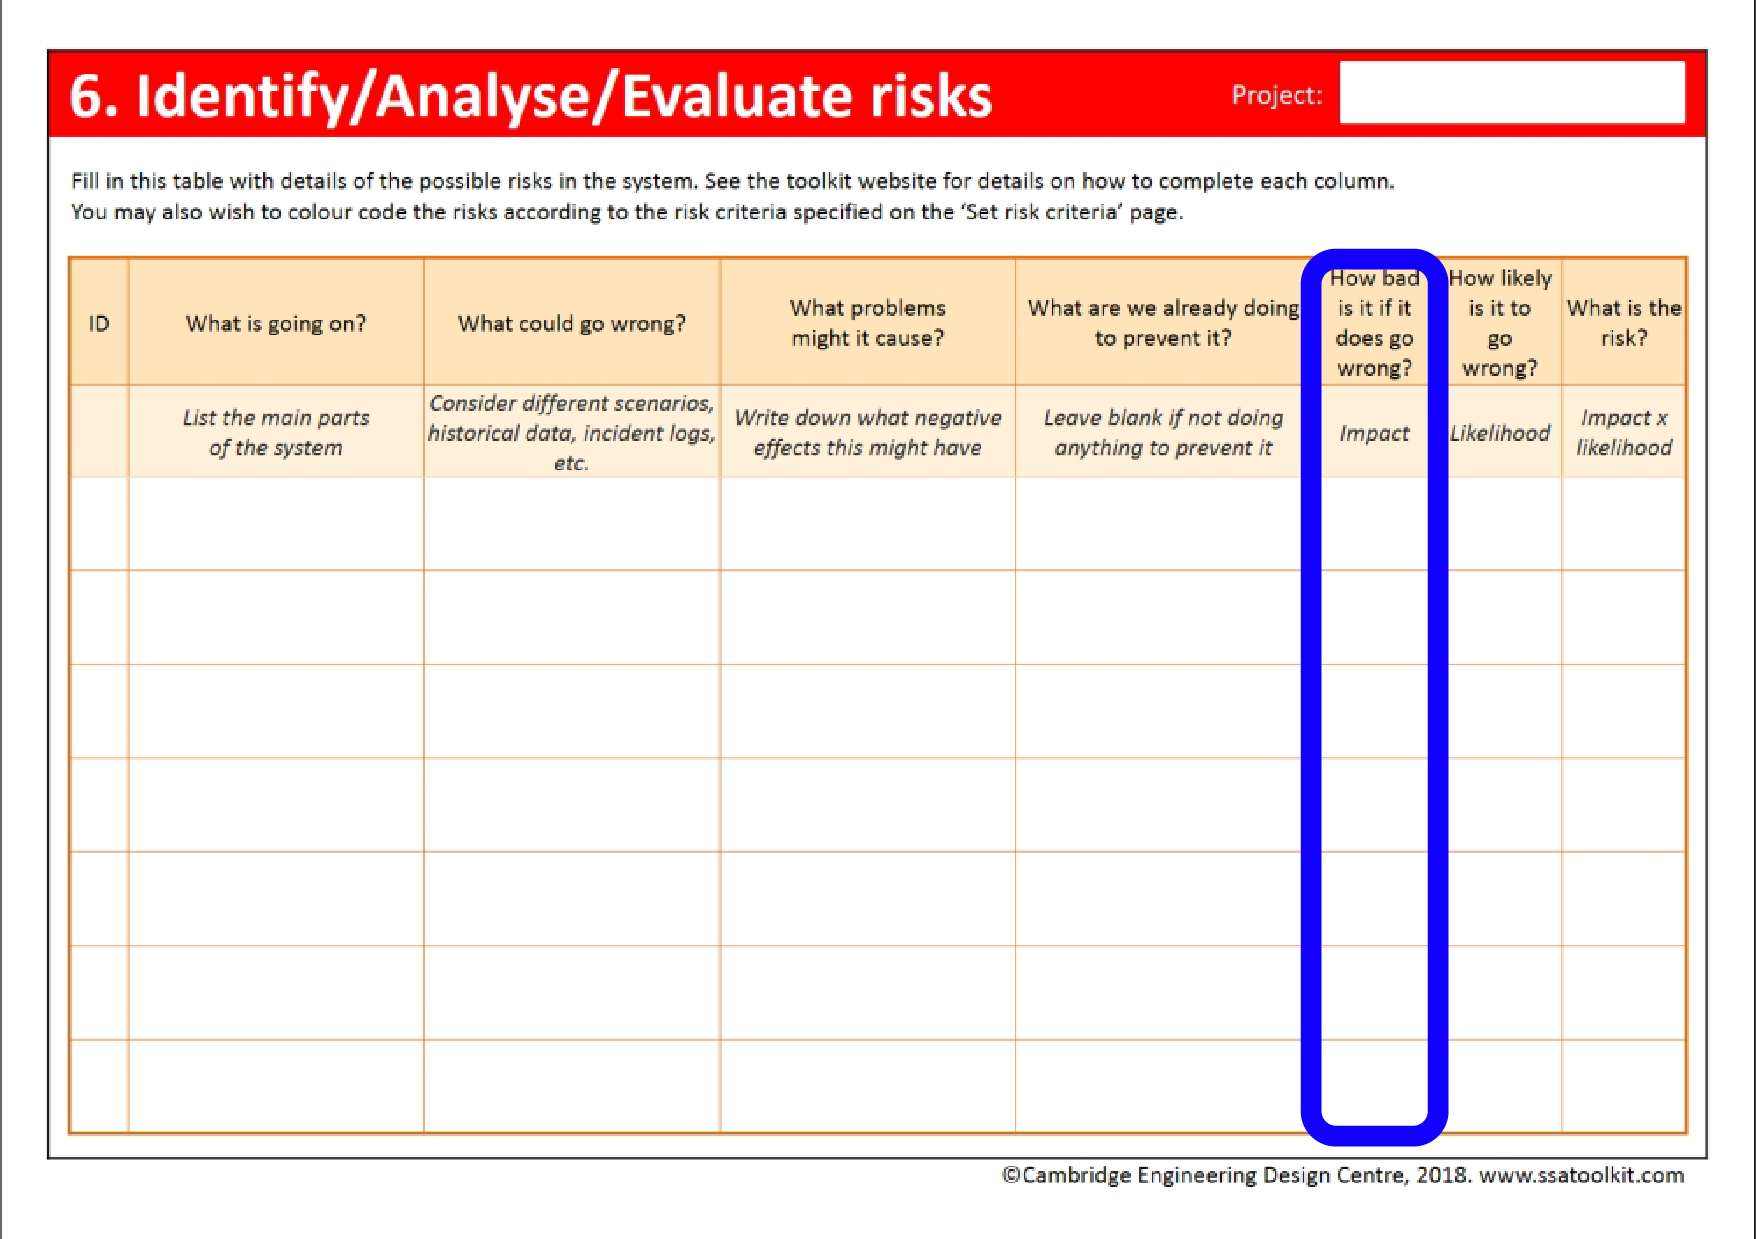 Screenshot of the Set risk criteria page of the assessment form